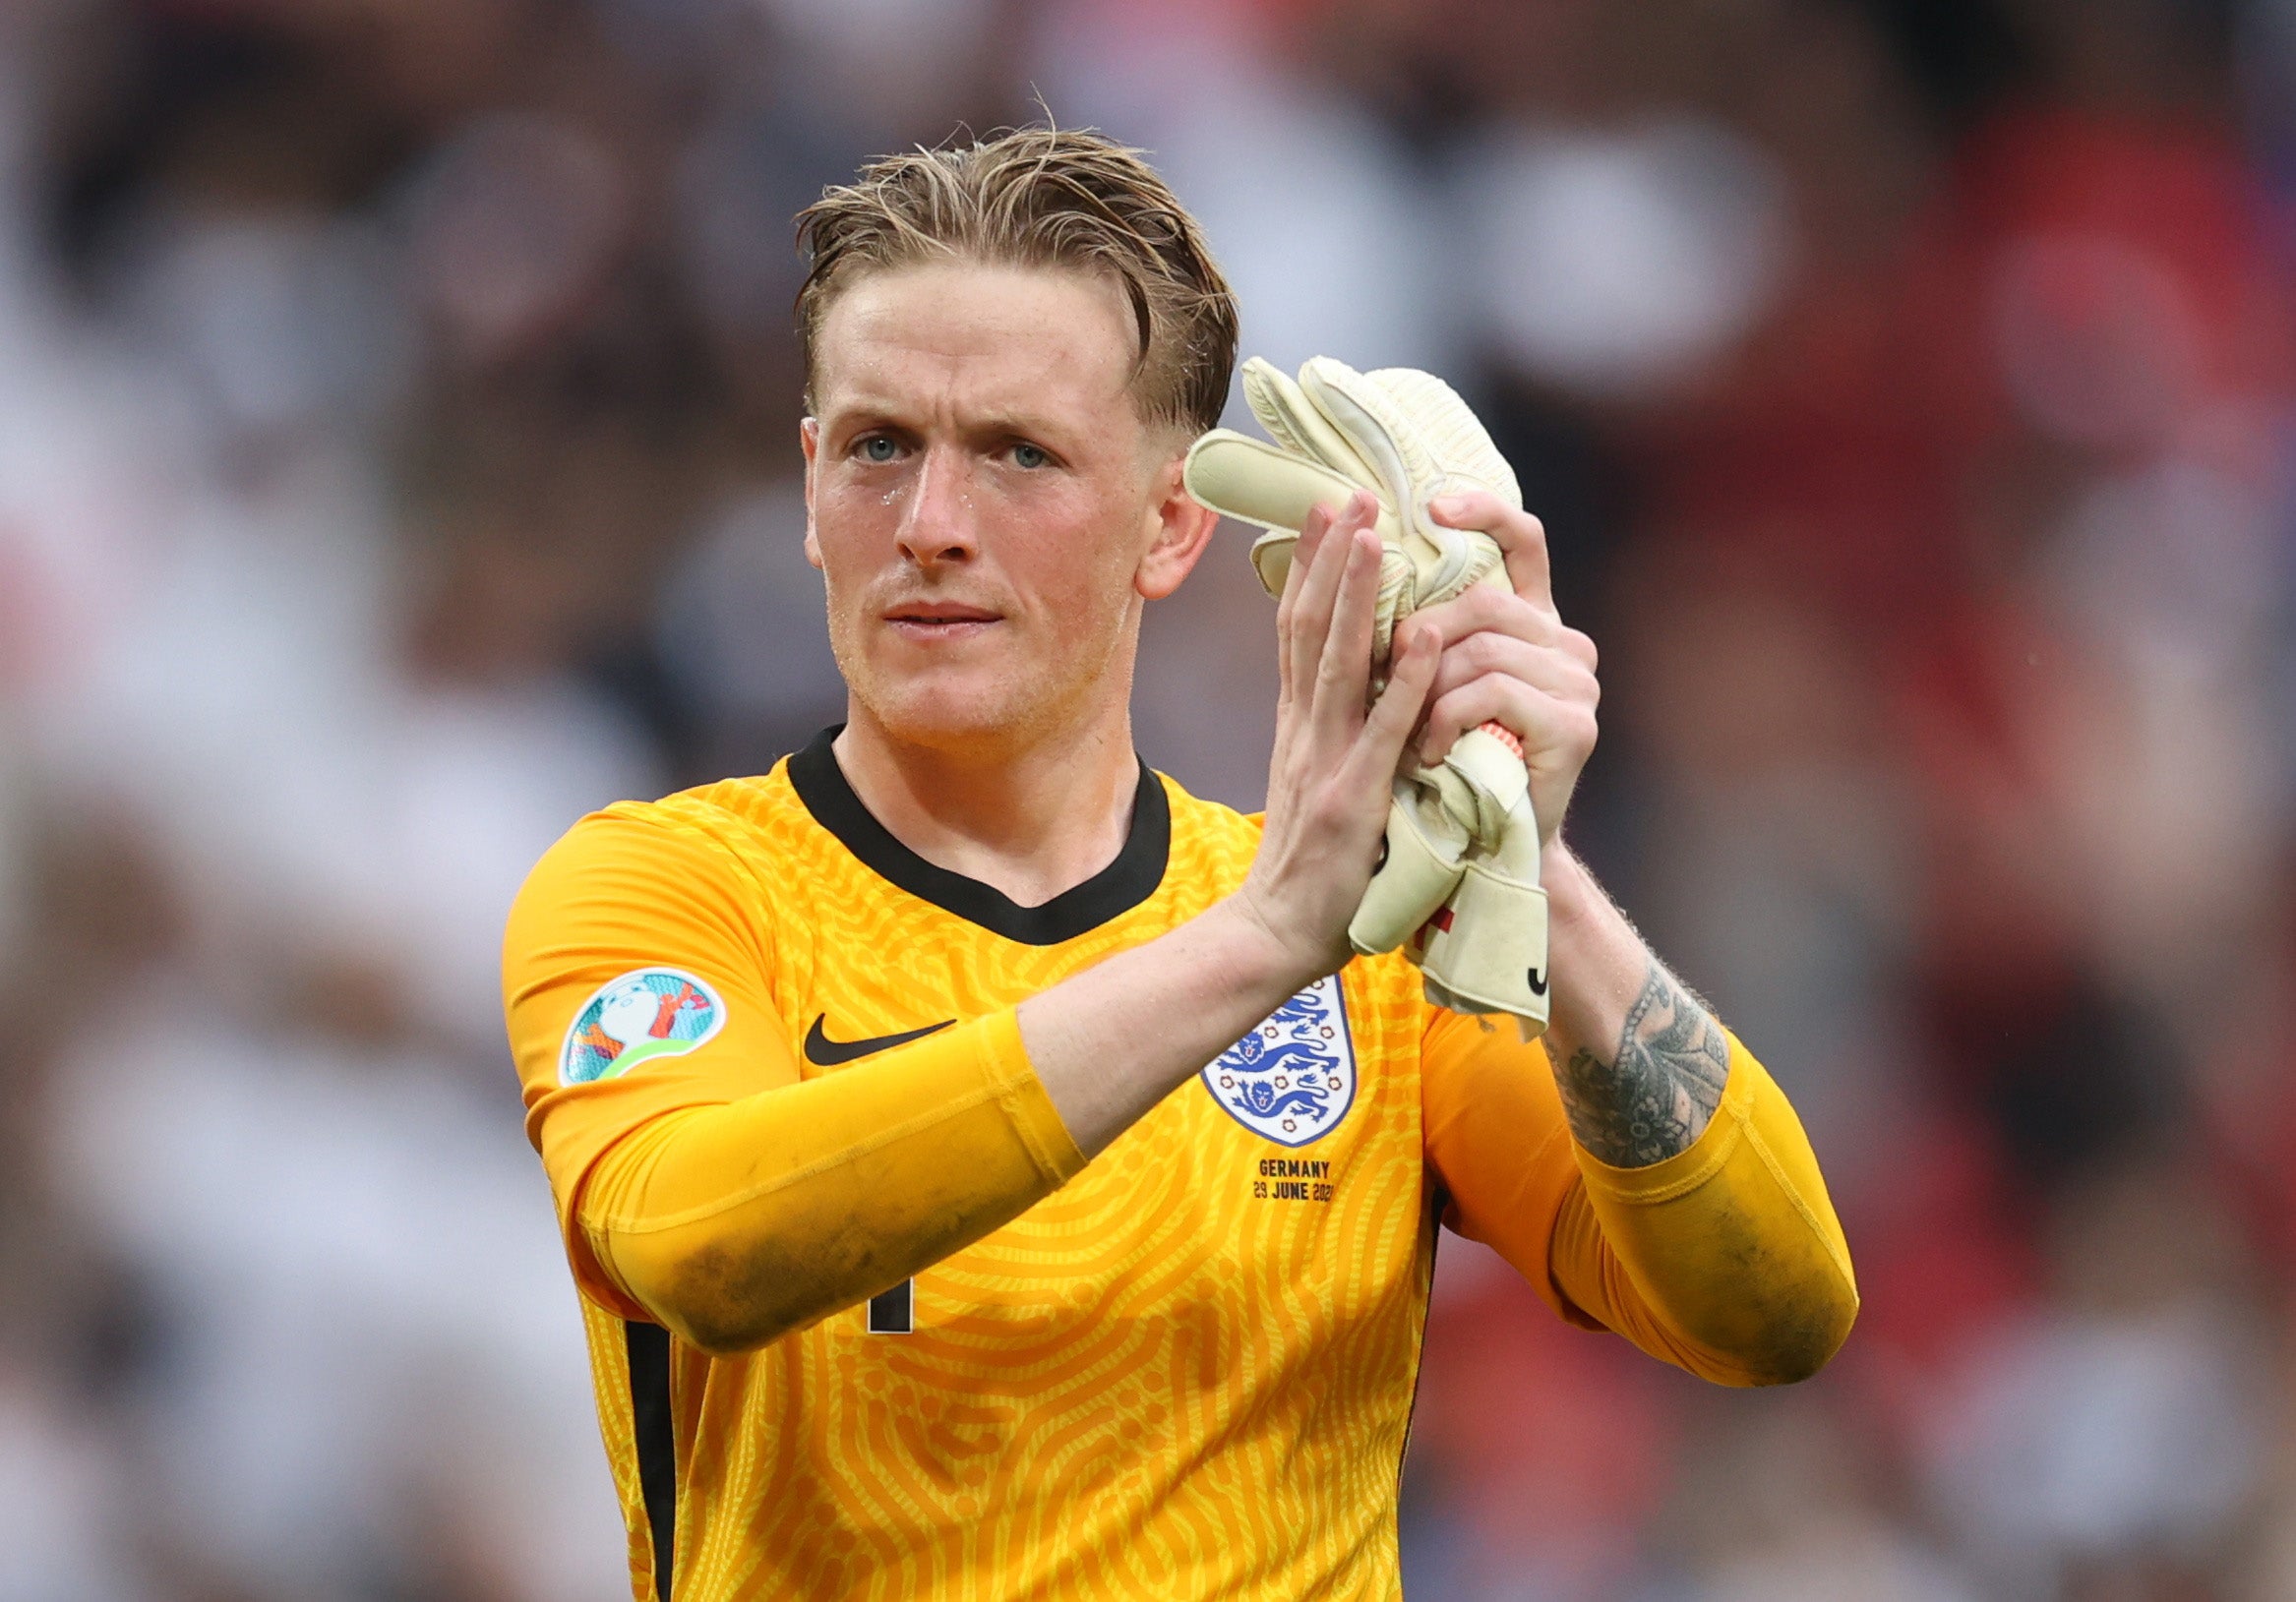 ‘We will all be rooting for him’: Jordan Pickford will be playing in the quarter-final on Saturday